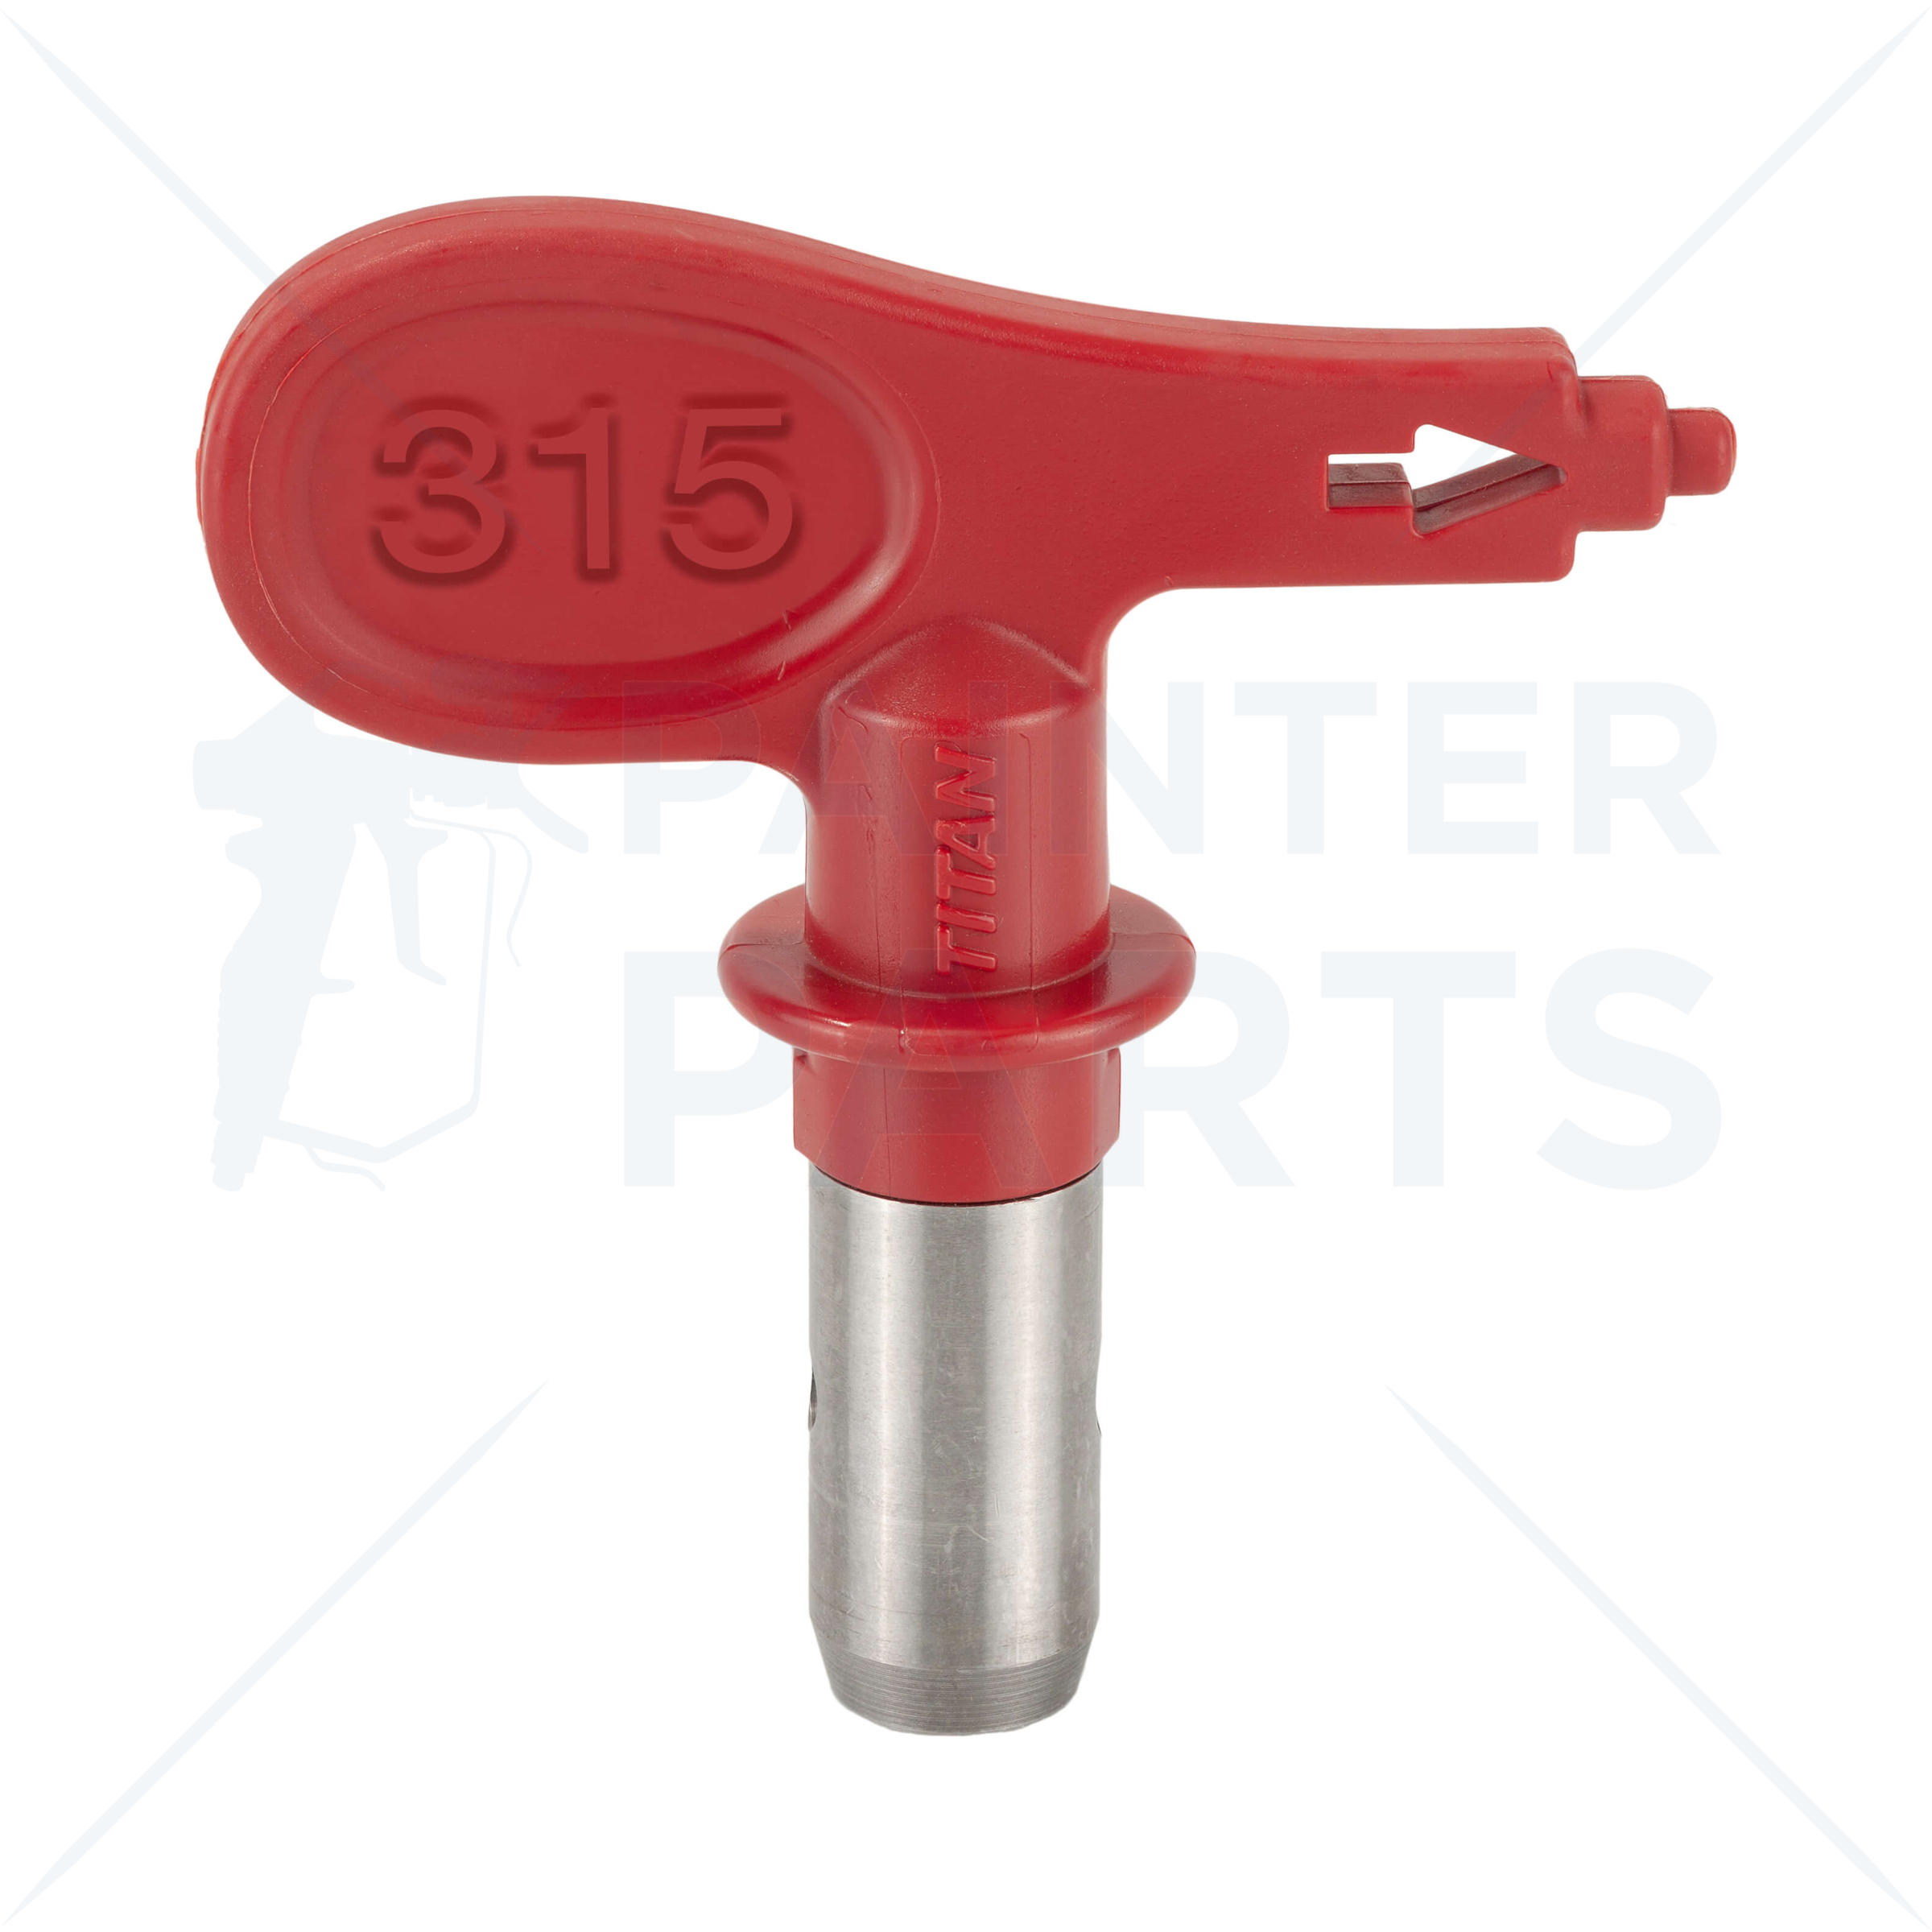 https://www.painterparts.com/files/styles/uc_product_full/public/dynamic/field/image/product/103/titan-tr1-red-spray-tip-695-315.jpg?itok=YT399O7V